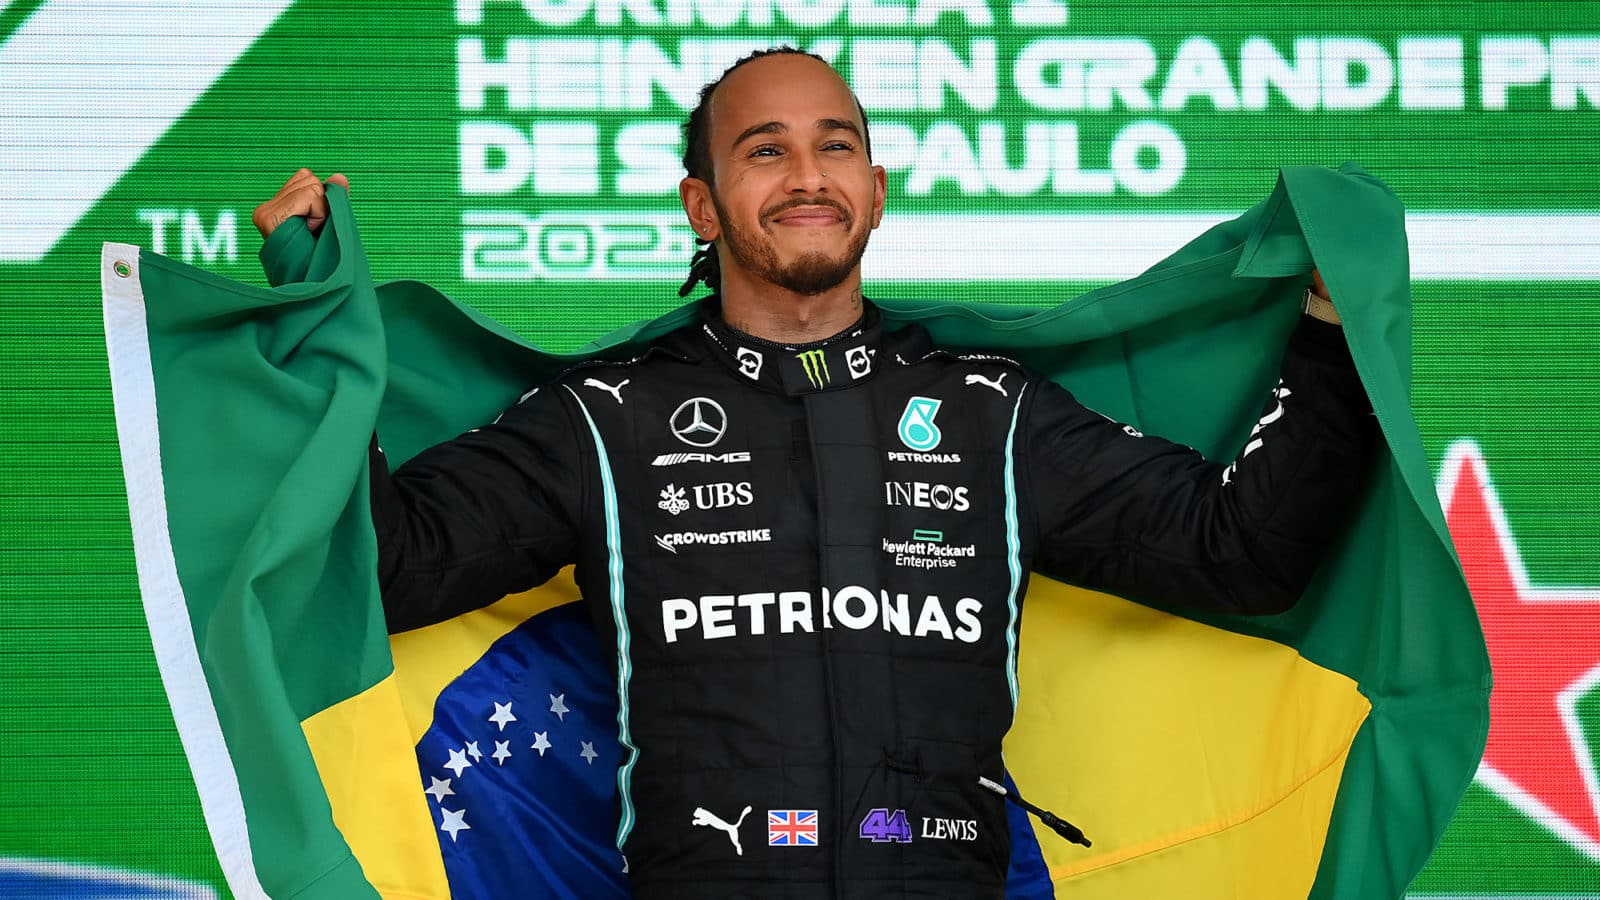 Lewis Hamilton with a Brazilian flag at the 2021 grand prix